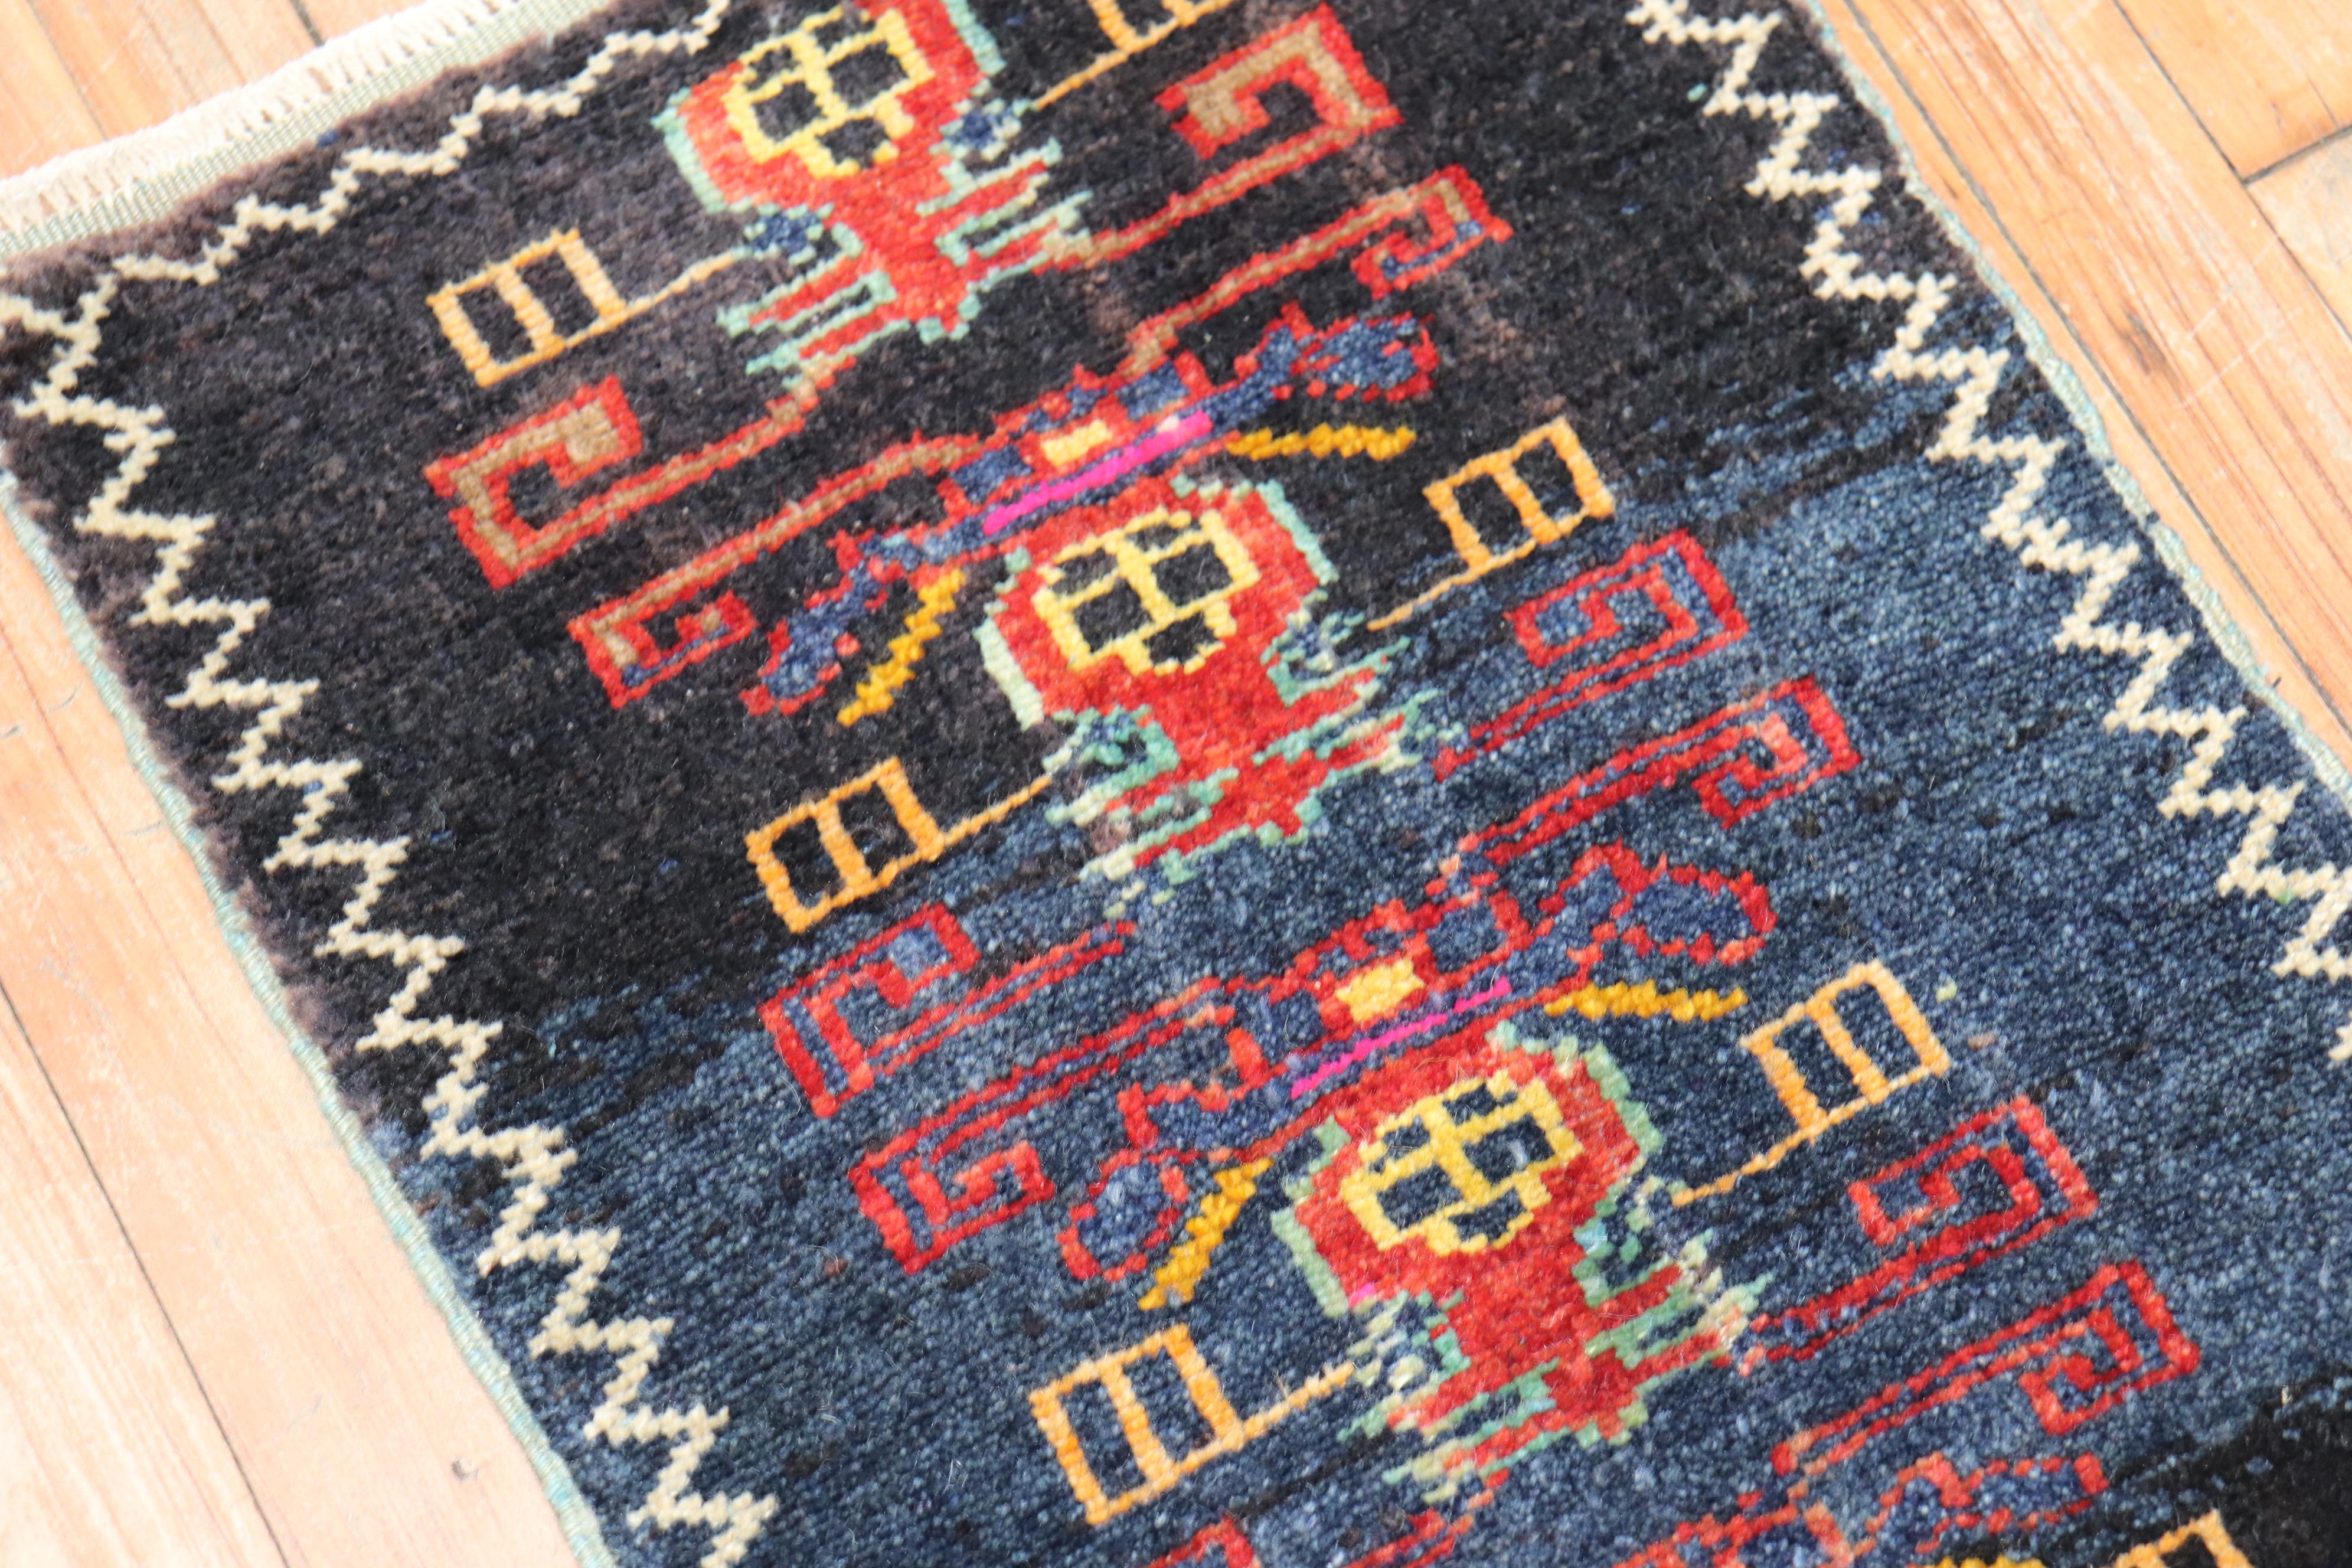 A mini size Turkish rug from the third quarter of the 20th century

Measures: 1'6” x 2'8